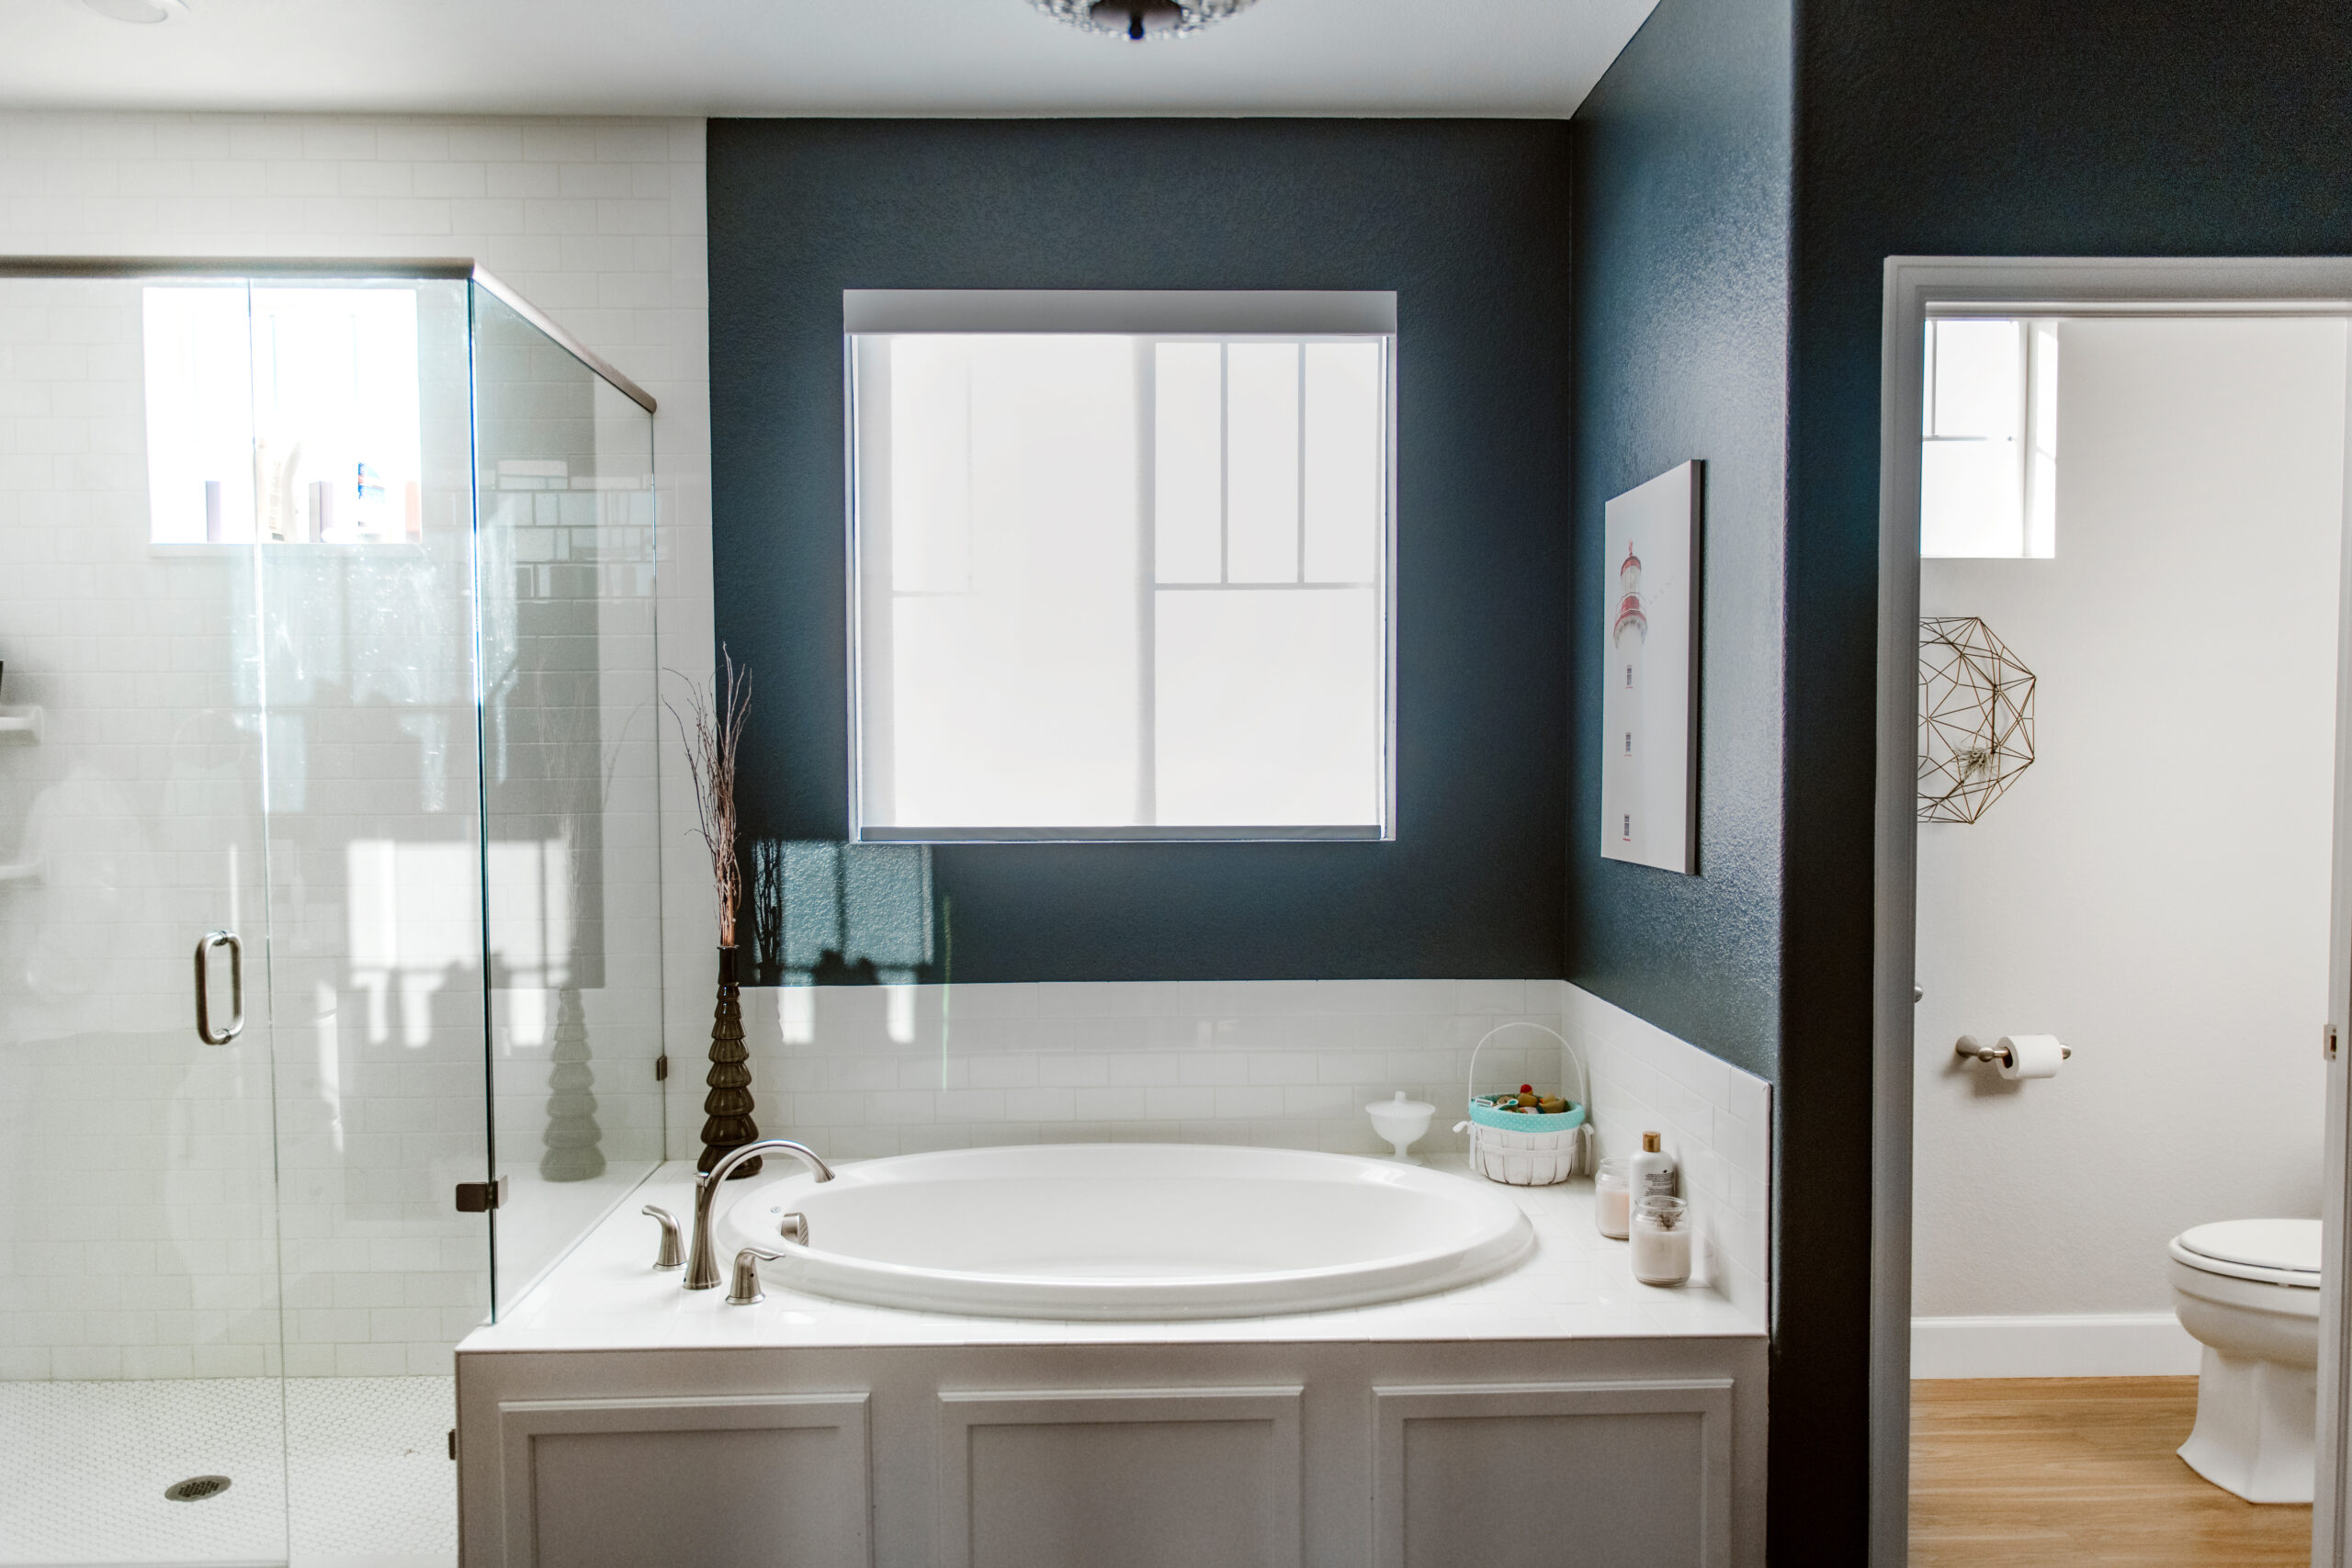 Sherwin Williams Charcoal Blue Review: Add Some Luxury to Your Home 